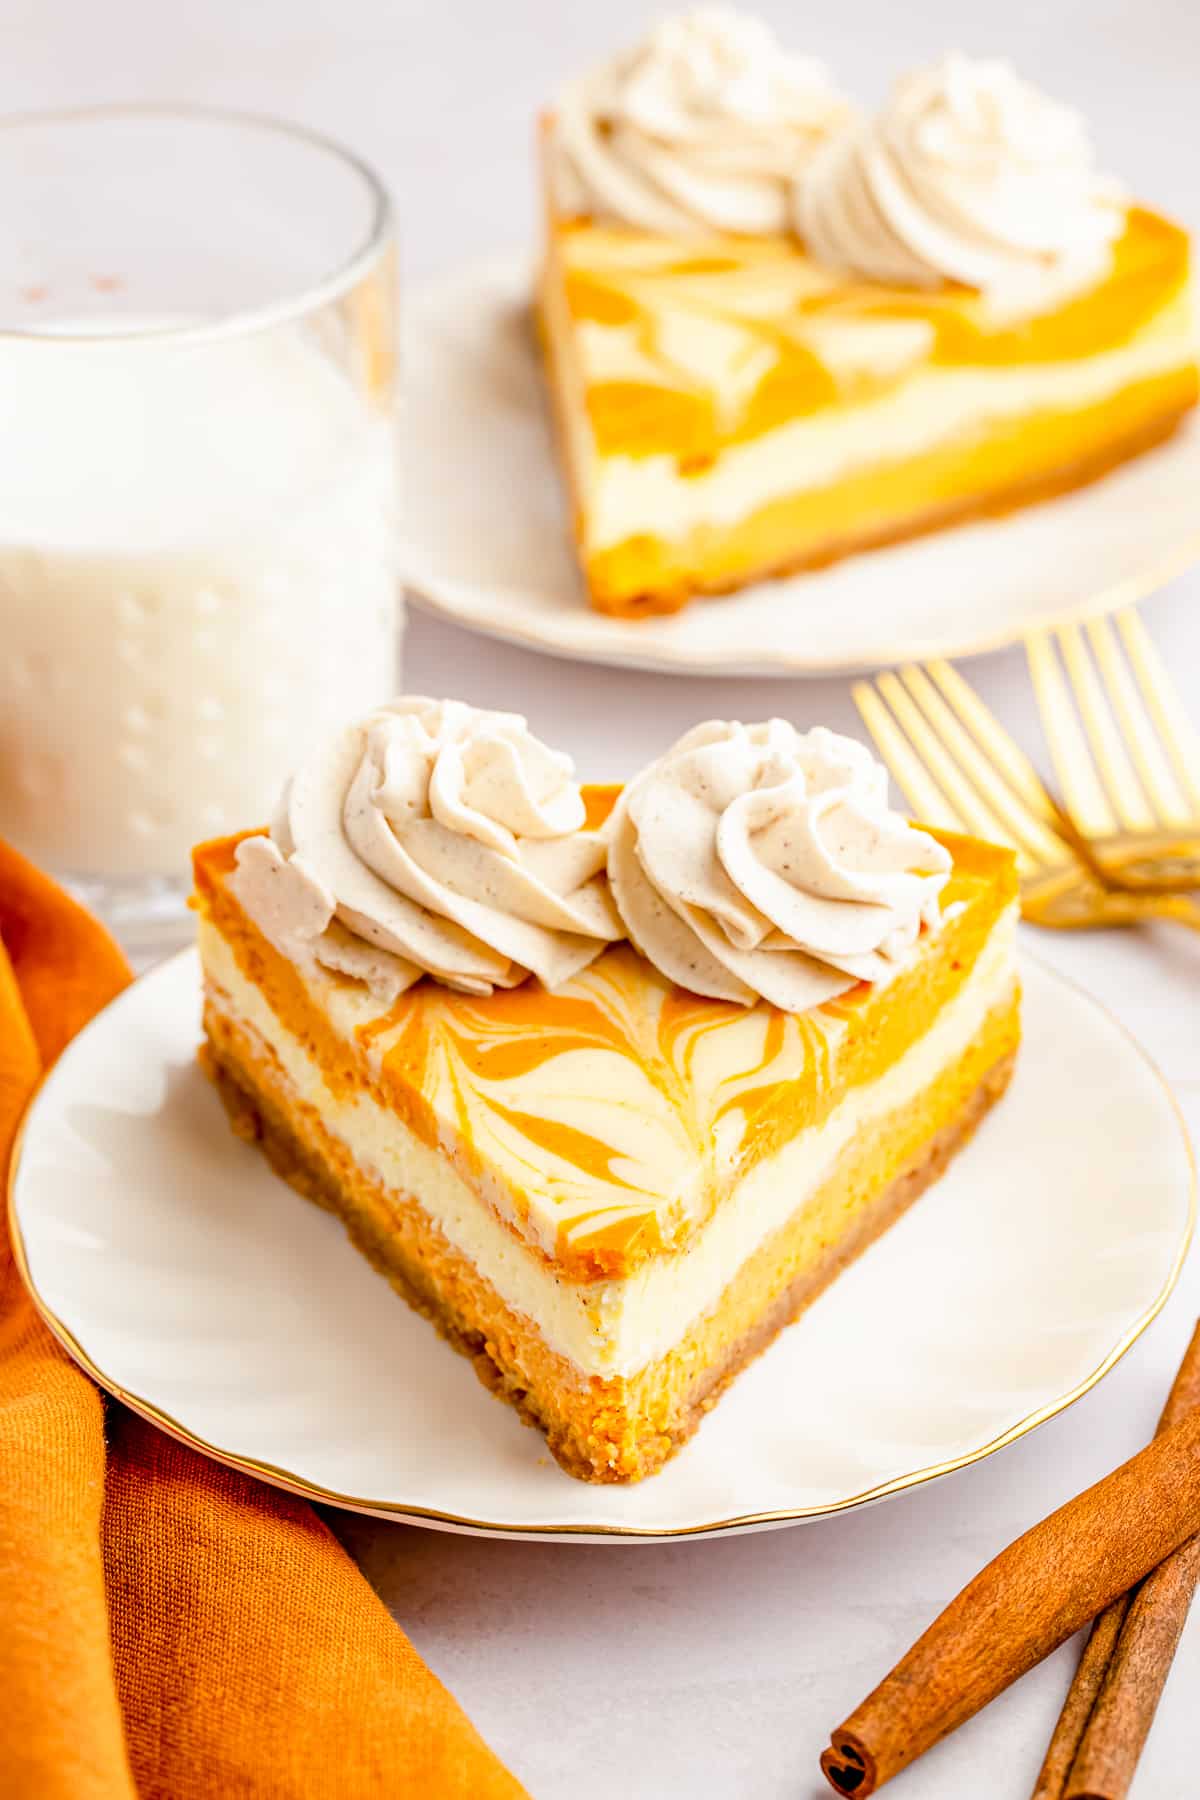 Front of Pumpkin Cheesecake showing swirls in top and whipped cream.